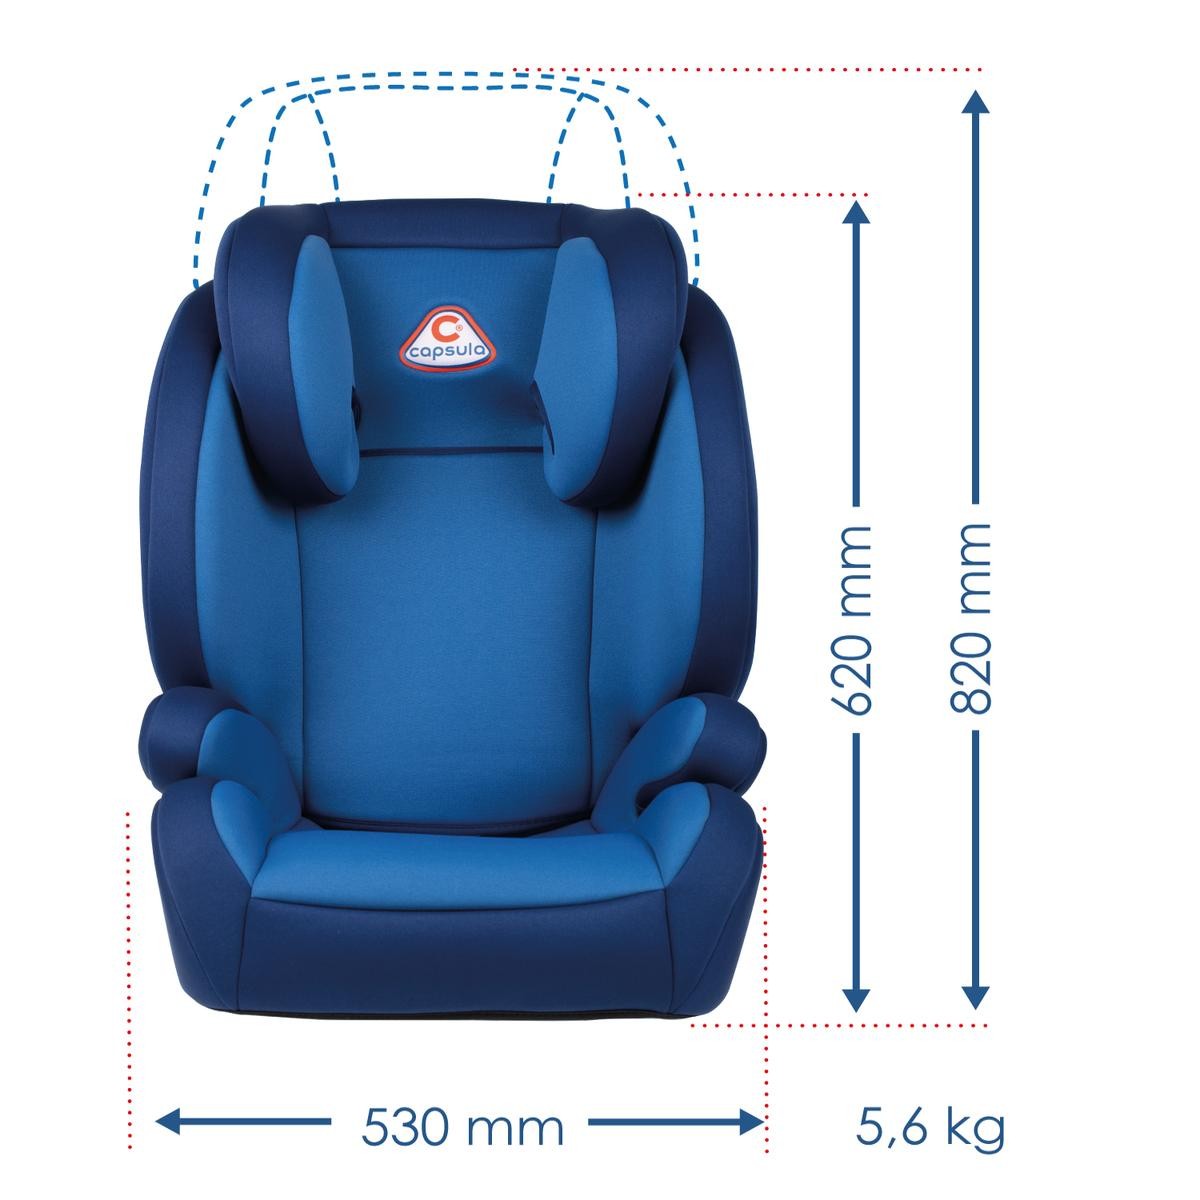 772140 Children's seat capsula 772140 review and test